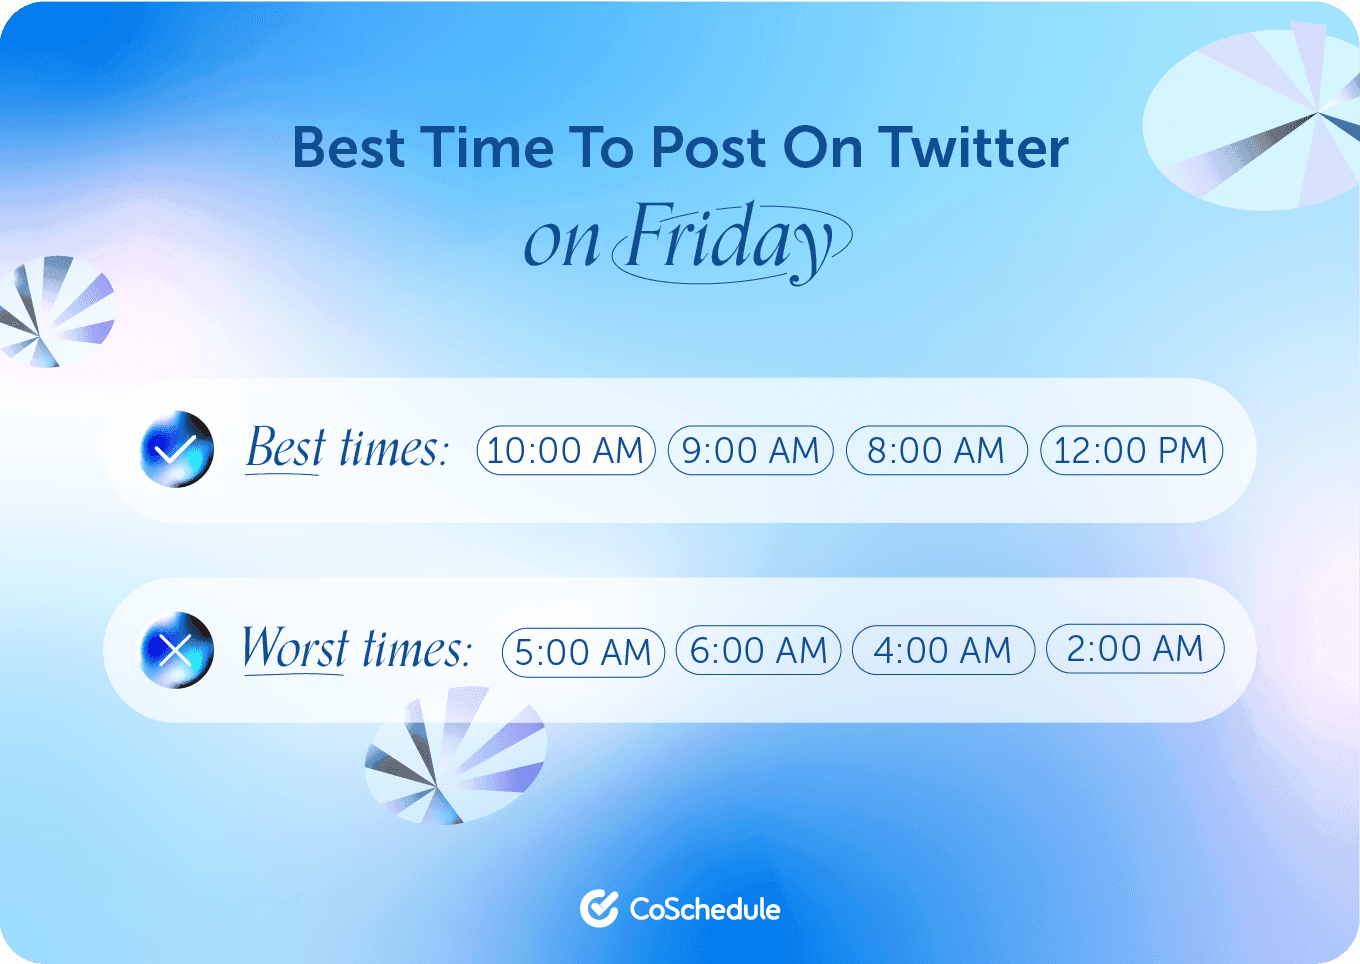 Coschedule graphic on the best times to post to Twitter on Friday